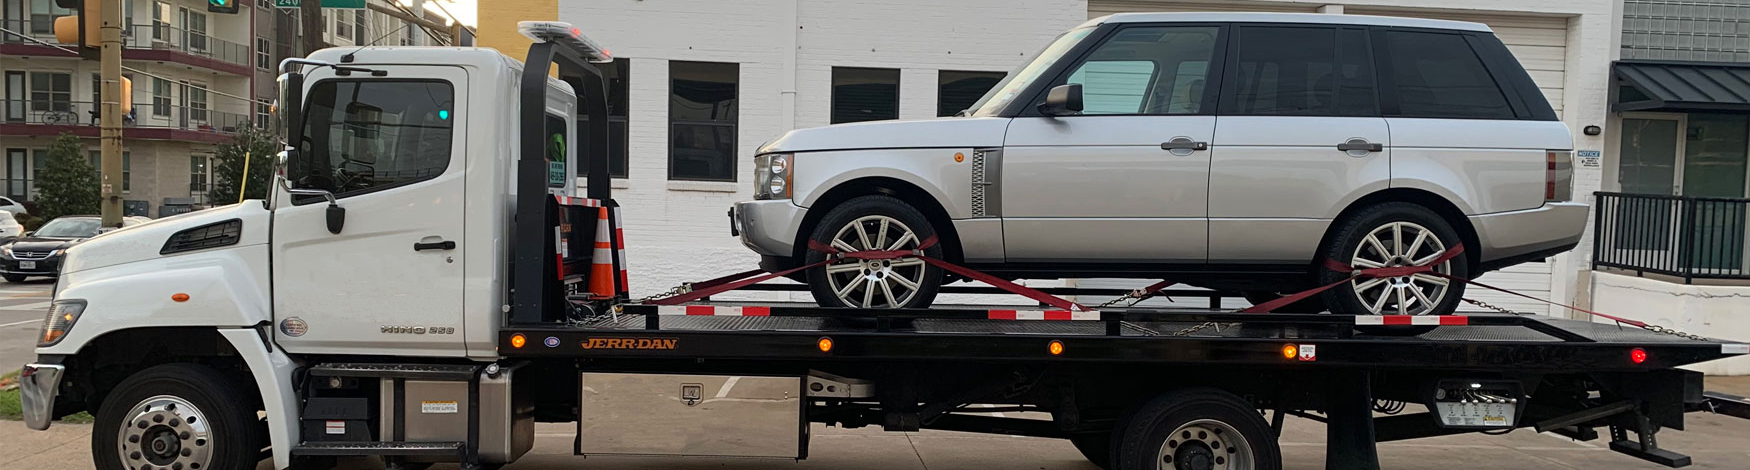 Local Flatbed Tow Truck | Flatbed Towing Service Near Me | roll back truck